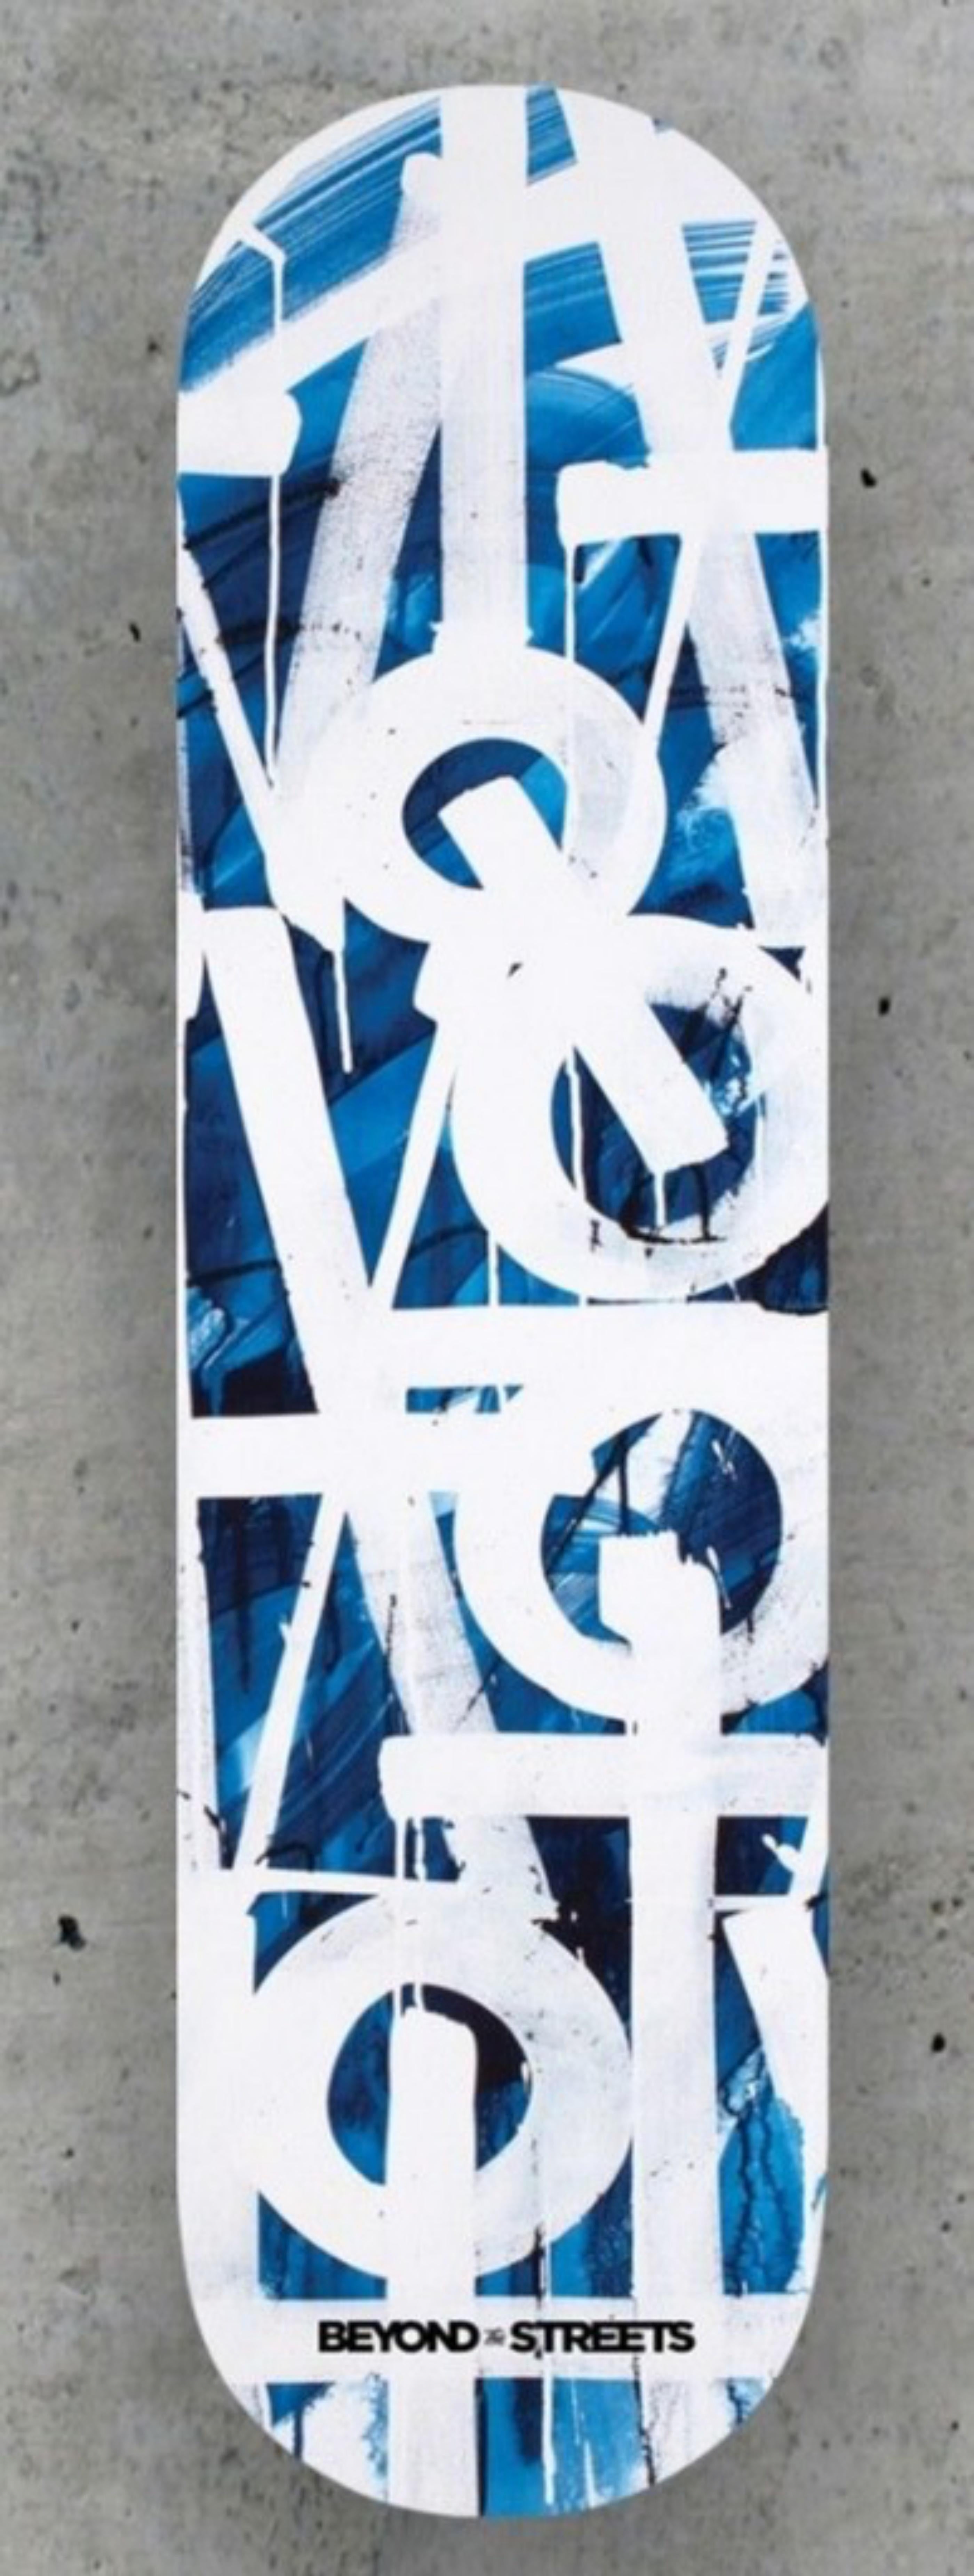 Skateboard Skate deck (Blue) with COA hand signed by RETNA - Lt. Ed. of only 100 For Sale 1